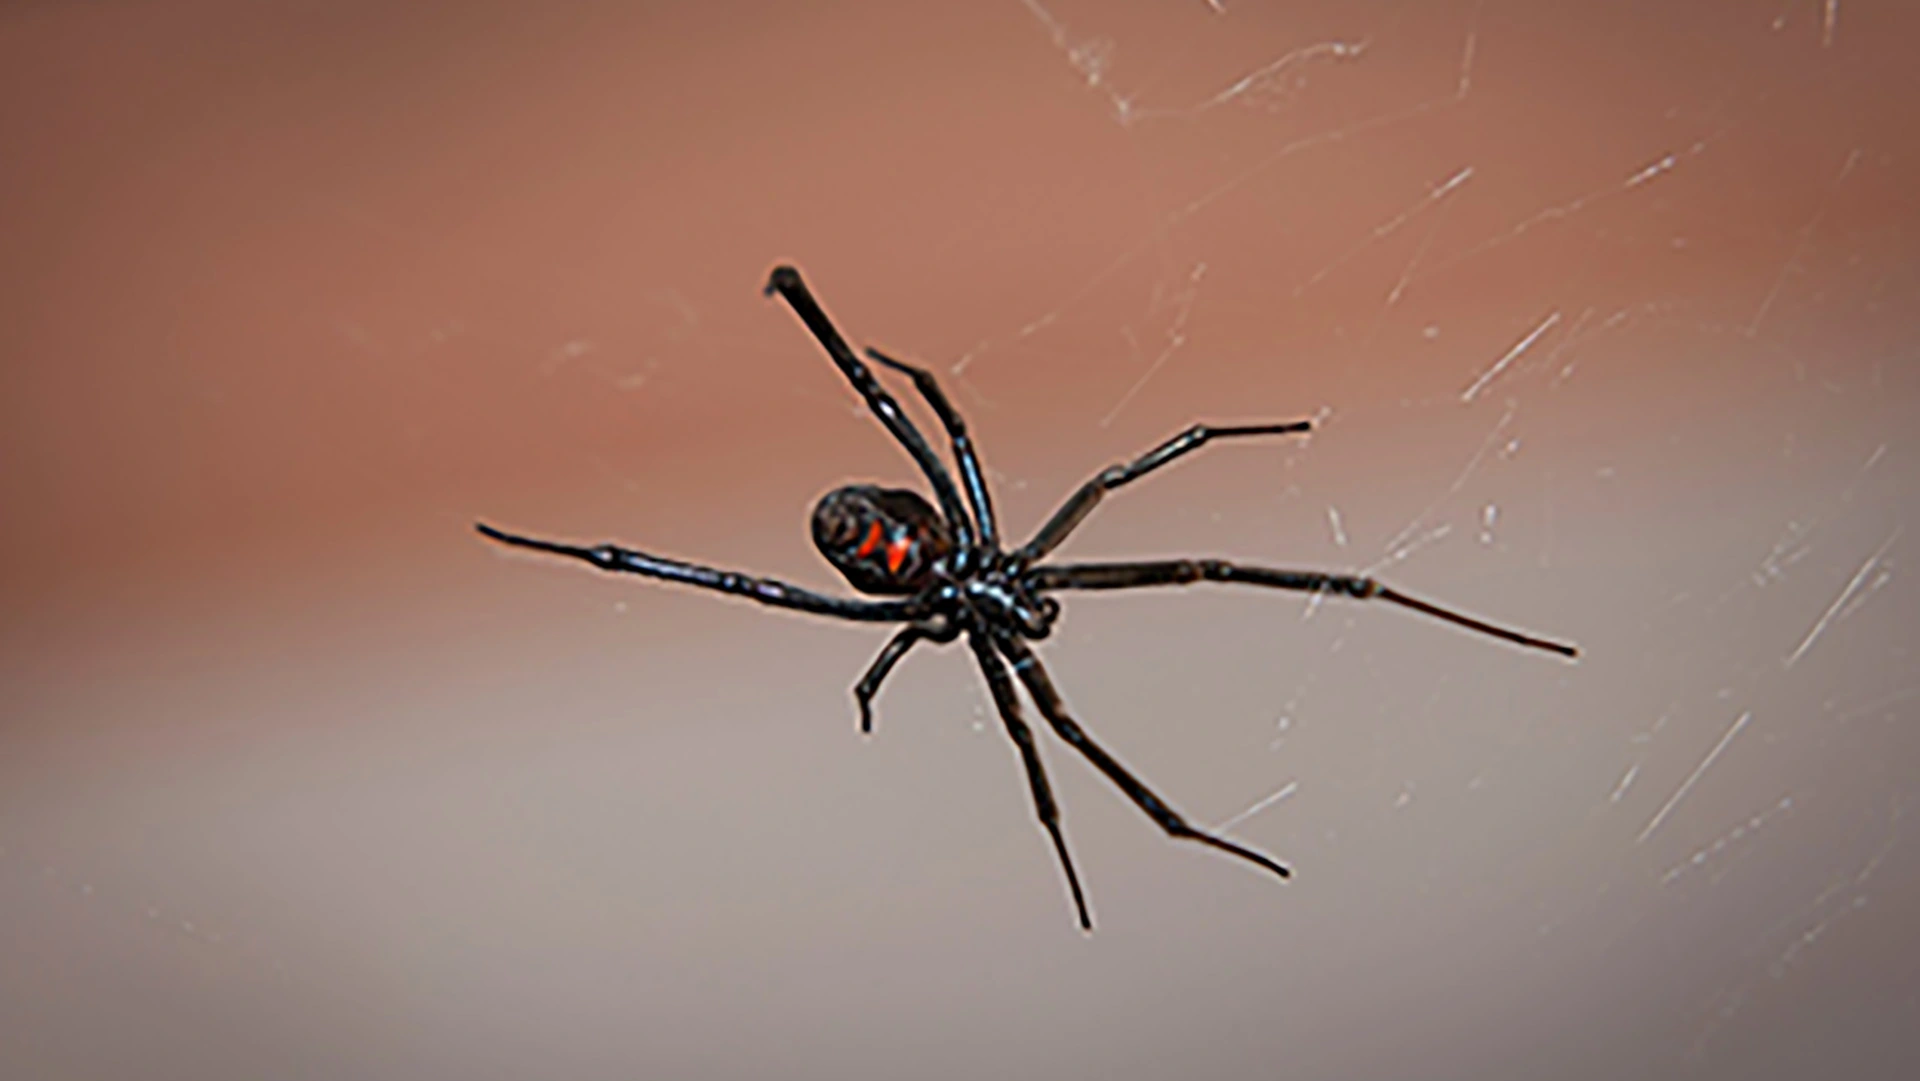 Black widow spiders are venomous and can be found within the service area of Sure Green Lawn & Tree Service.